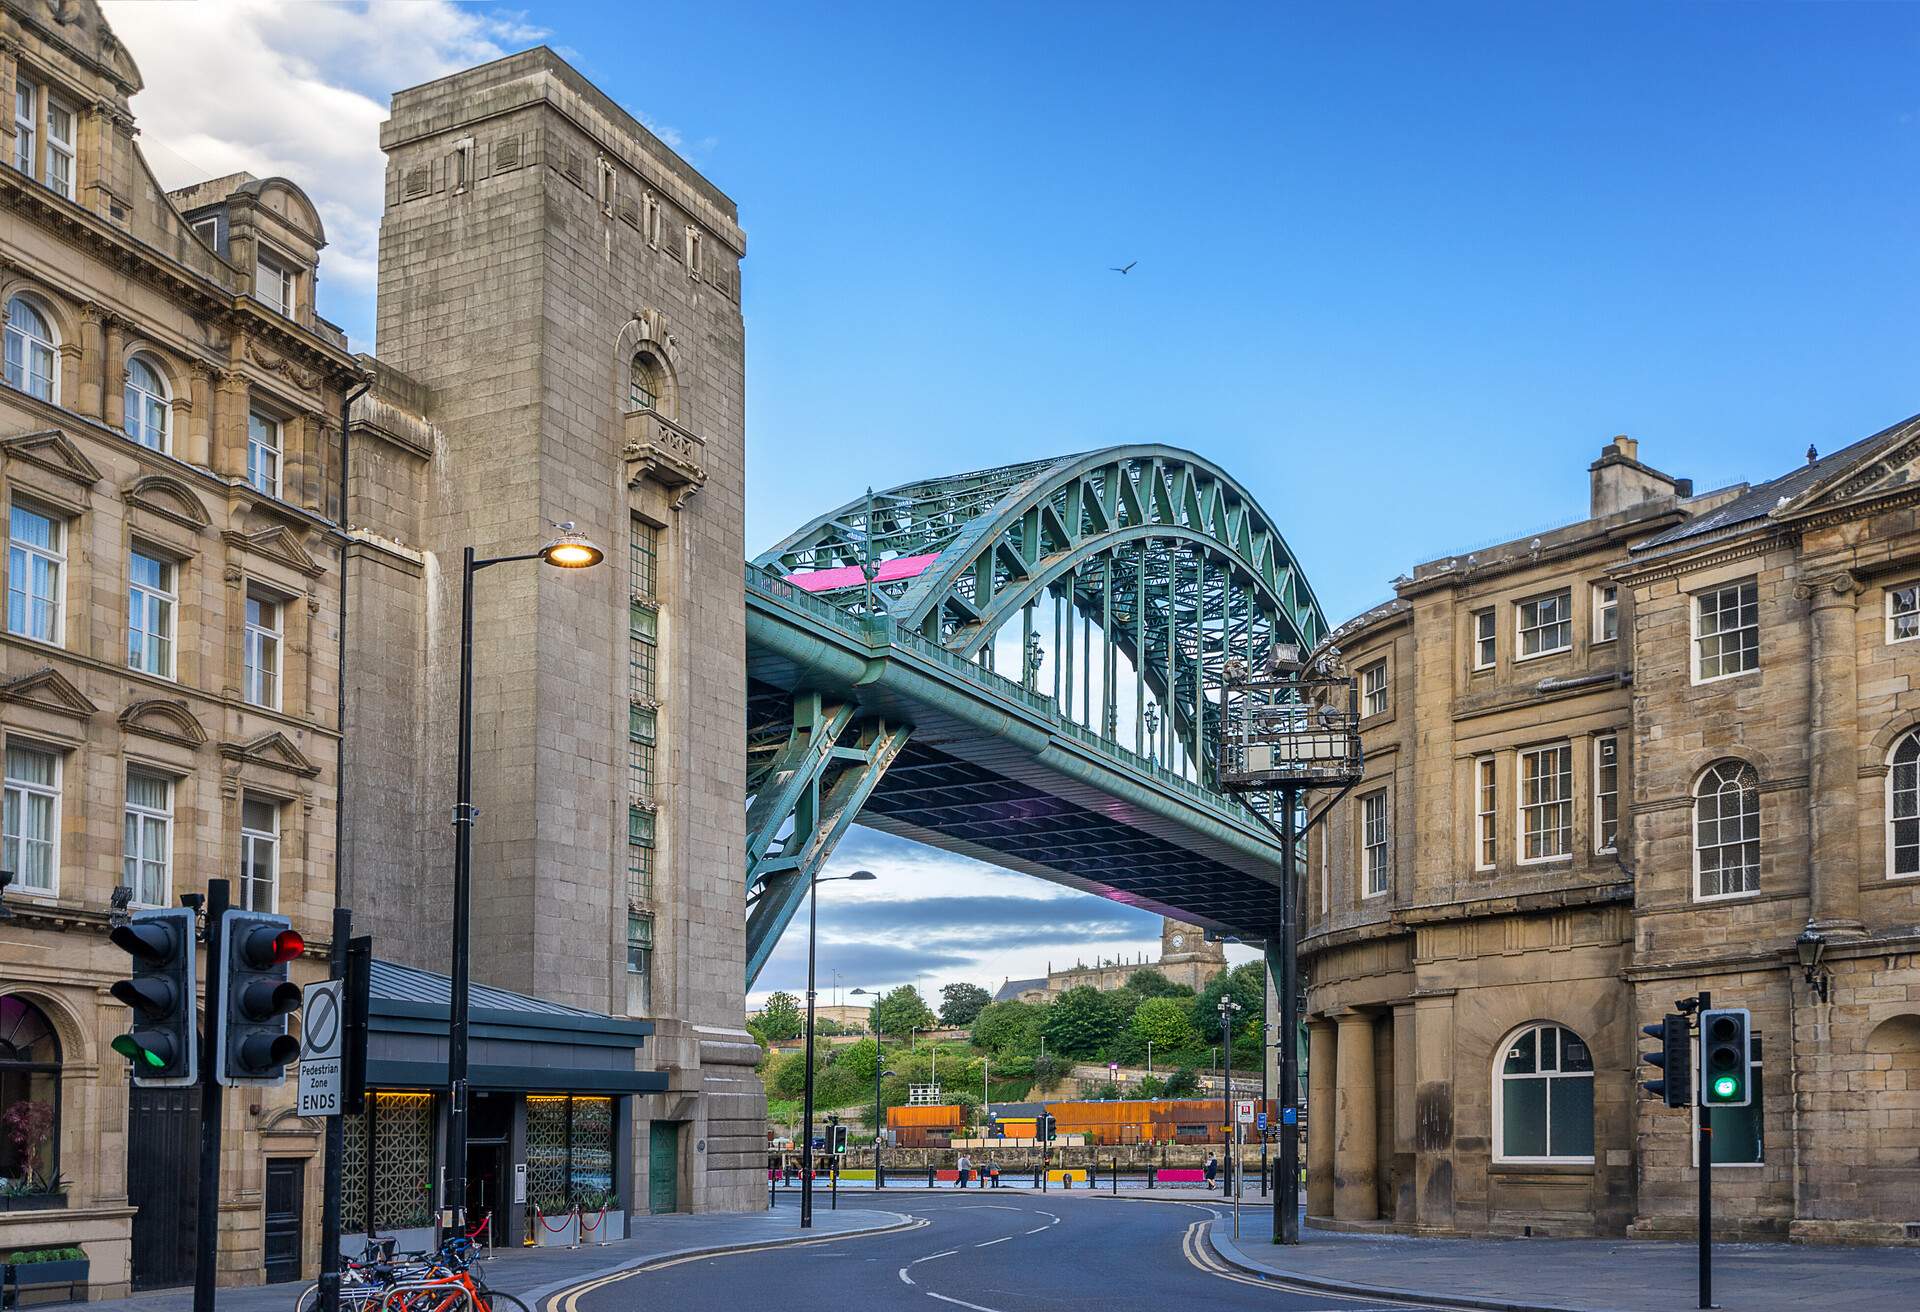 The Tyne Bridge across the Tyne River between Newcastle and Gateshead Quayside's in the north east of England